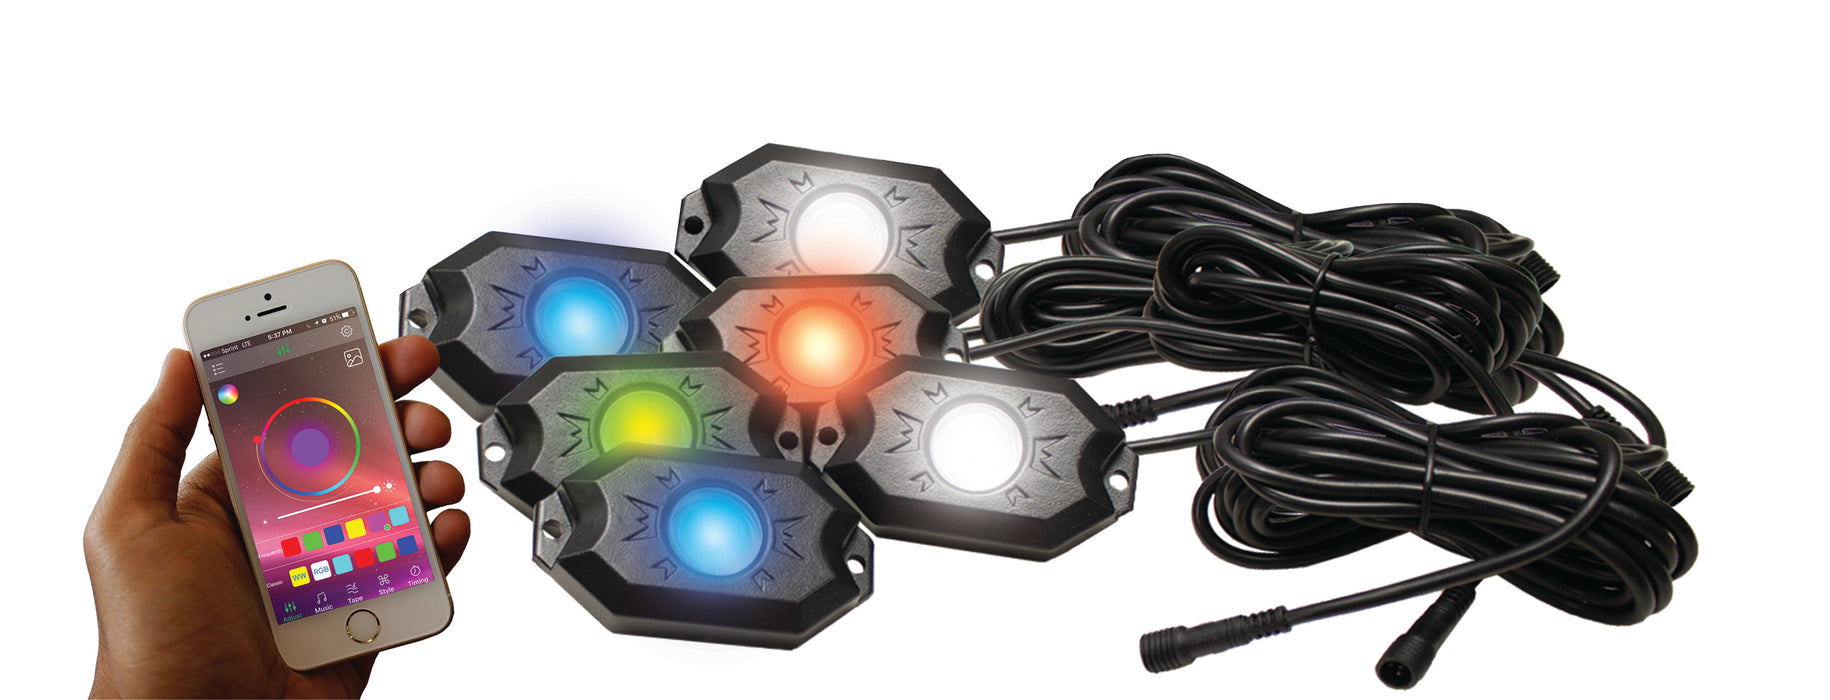 6-POD RGBW Hi-Power Rock Light Complete Kit with Bluetooth APP controls  in Retail Box